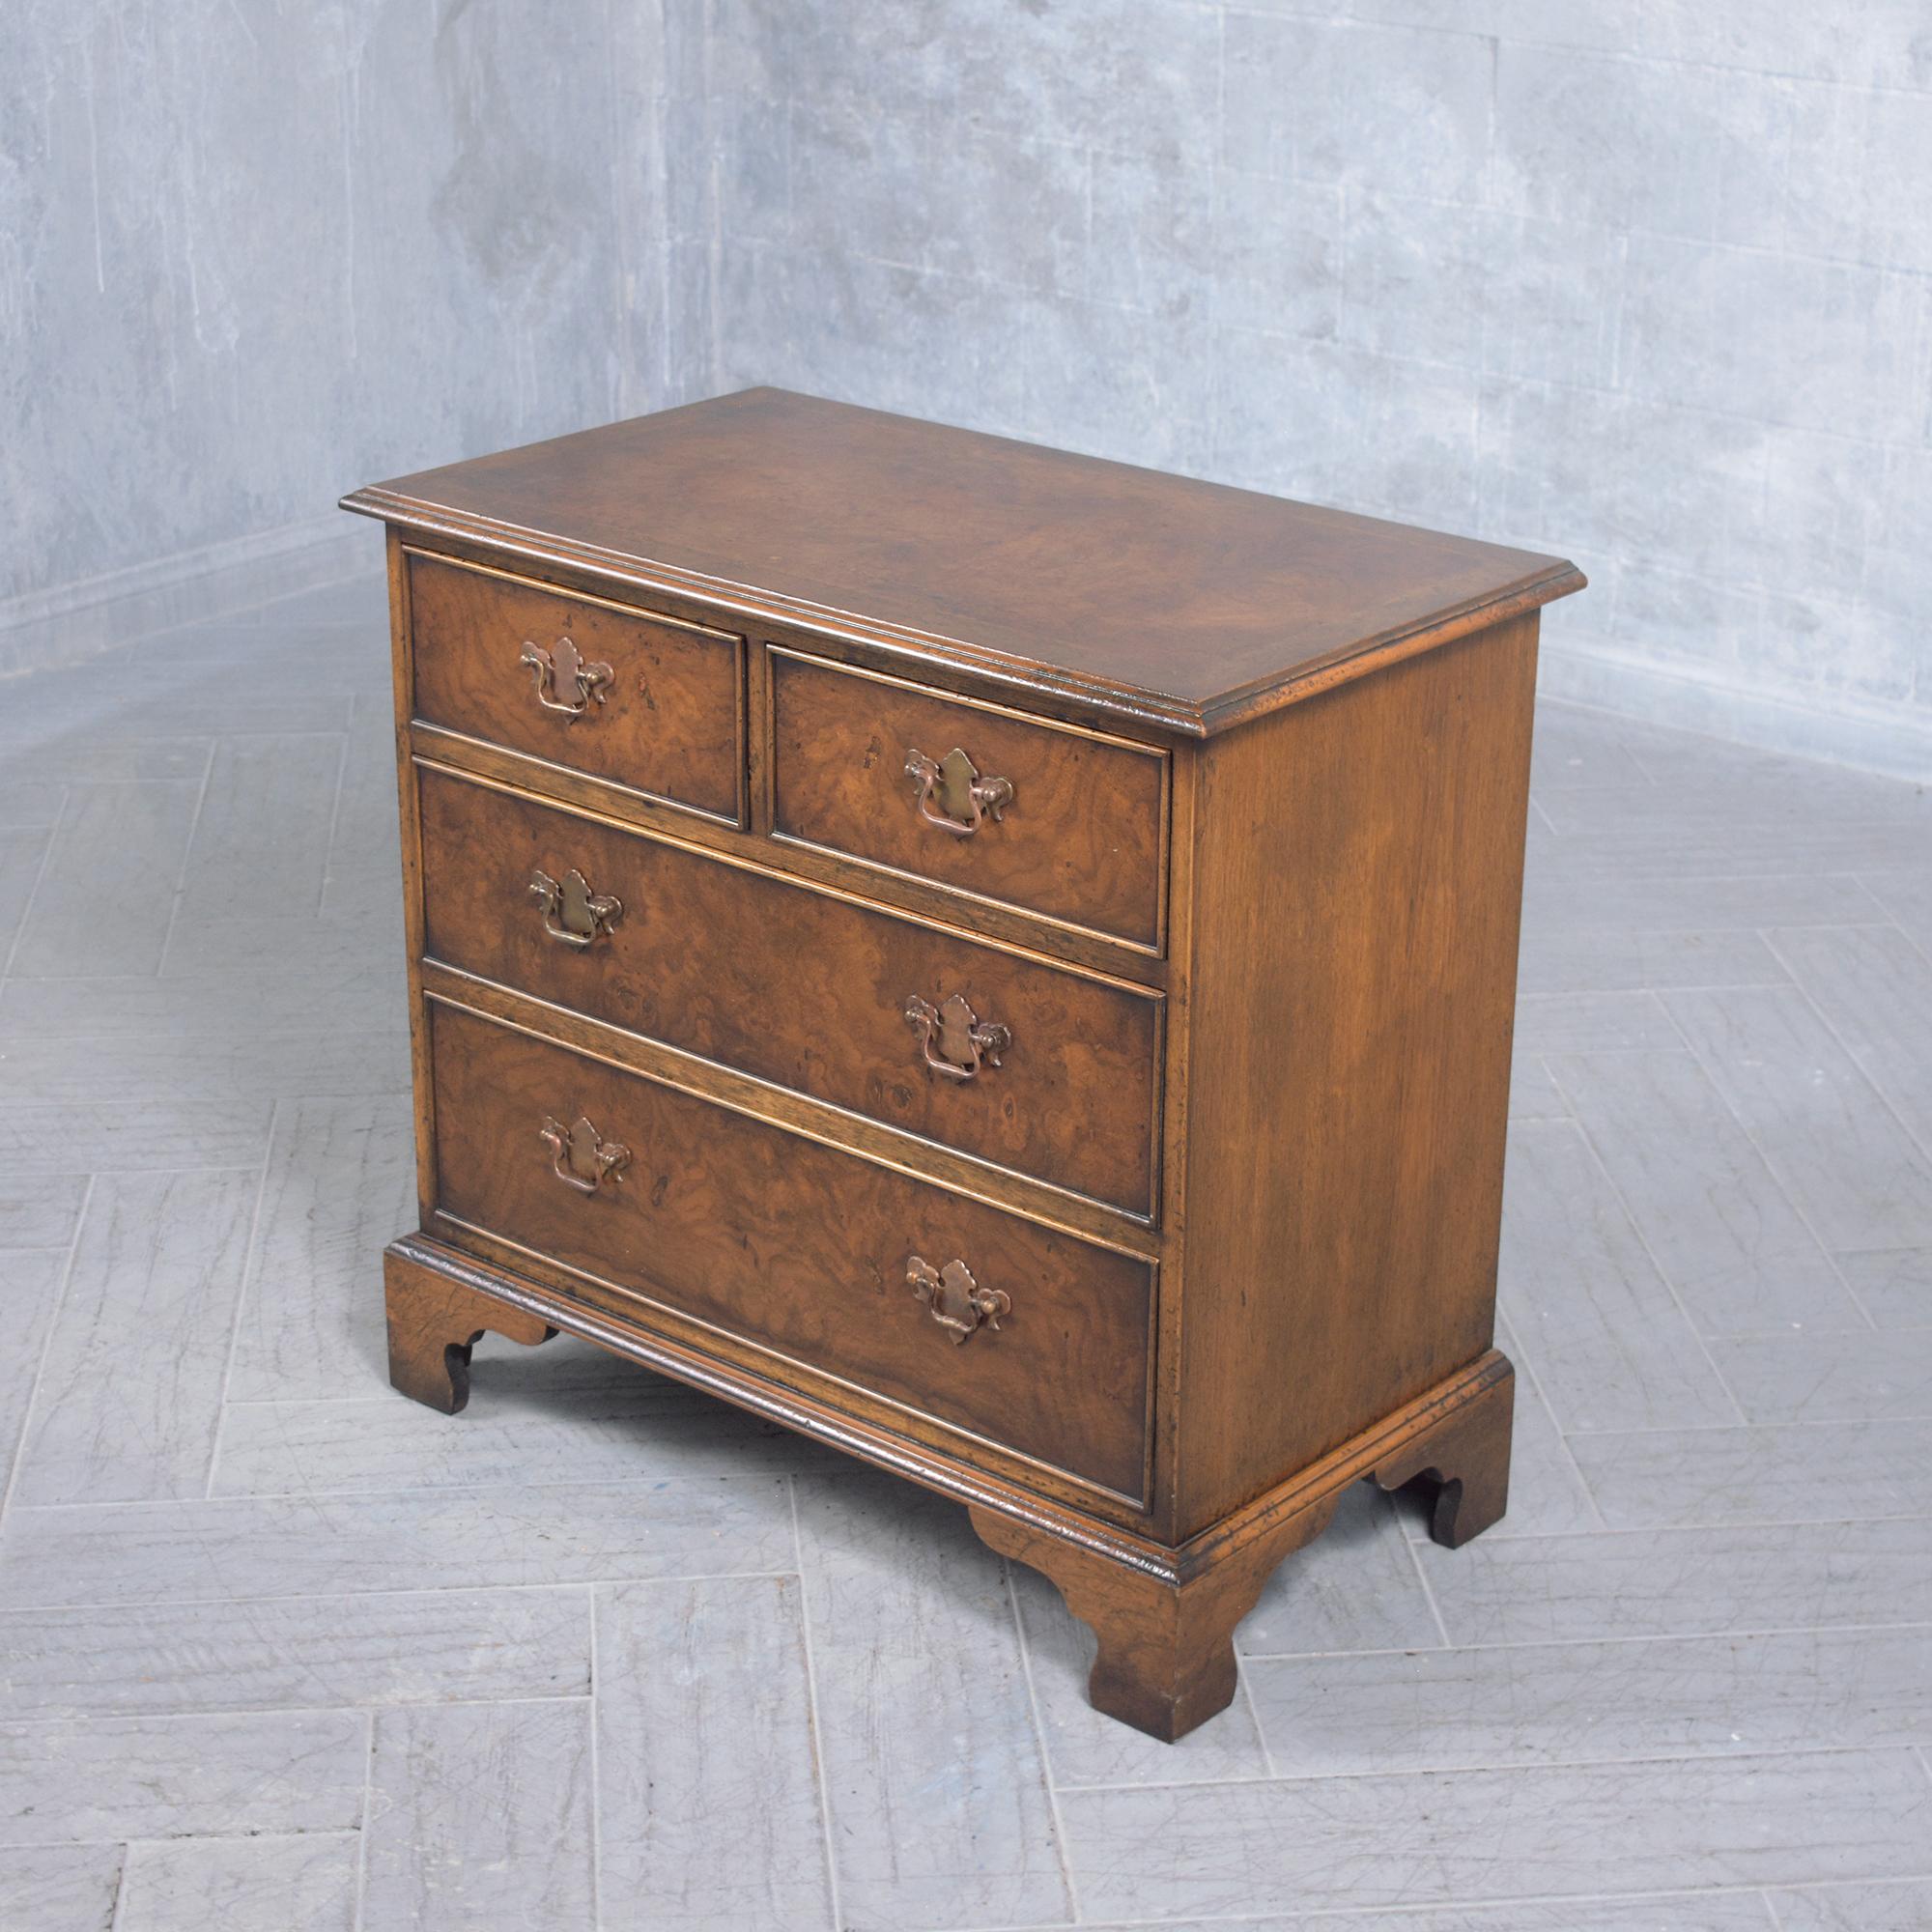 American Restored Early 1950s Burled Veneers Chest of Drawers: A Vintage Patina Finish For Sale